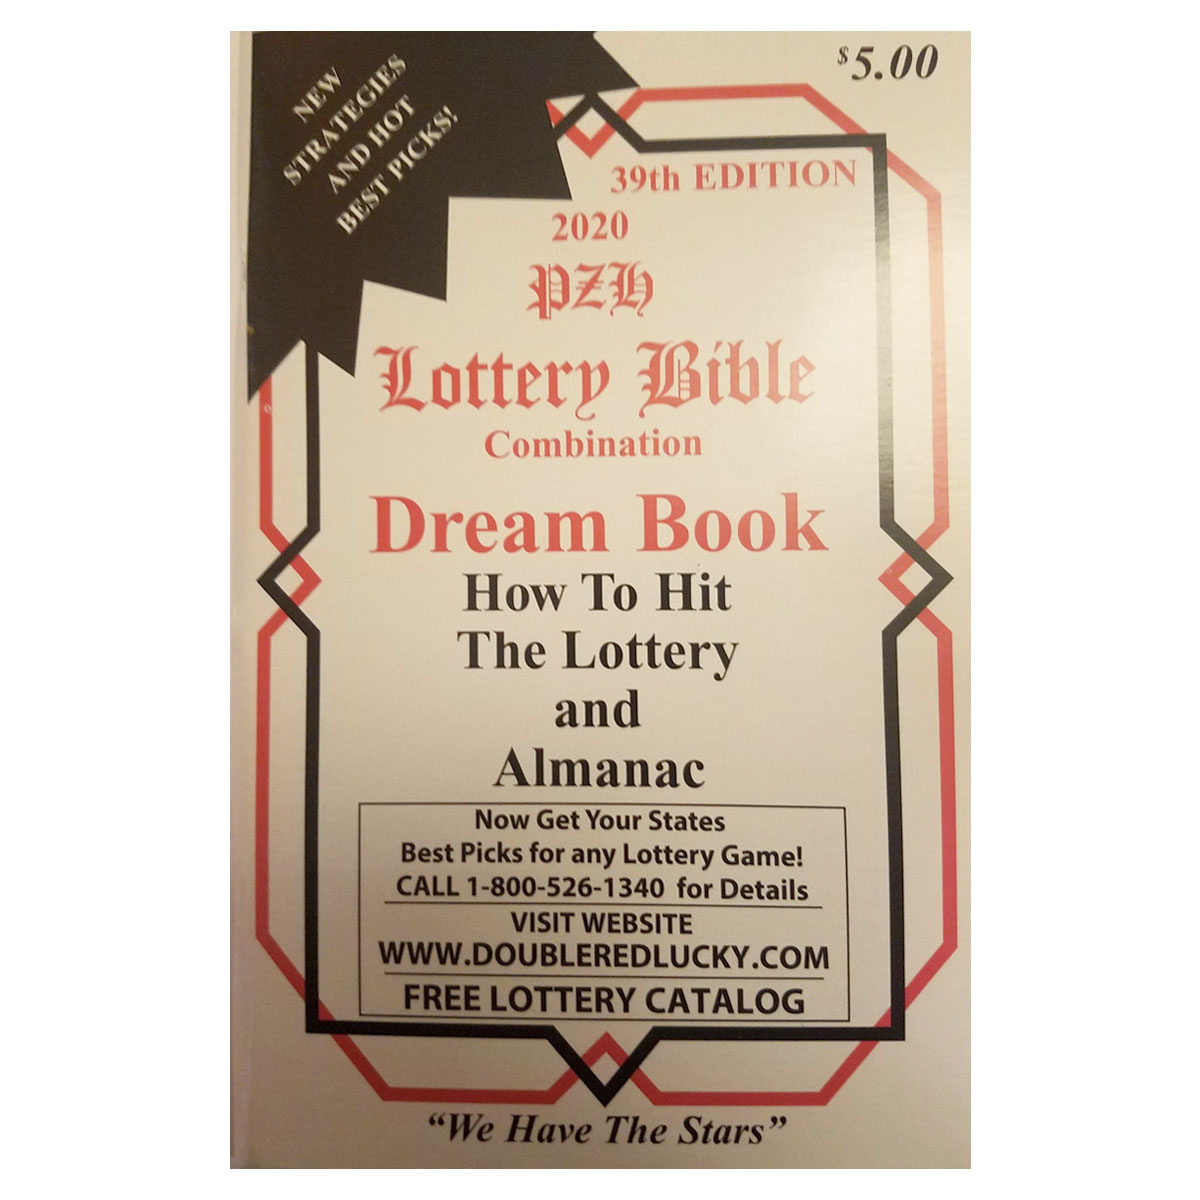 Lottery Bible / Dream Book combo